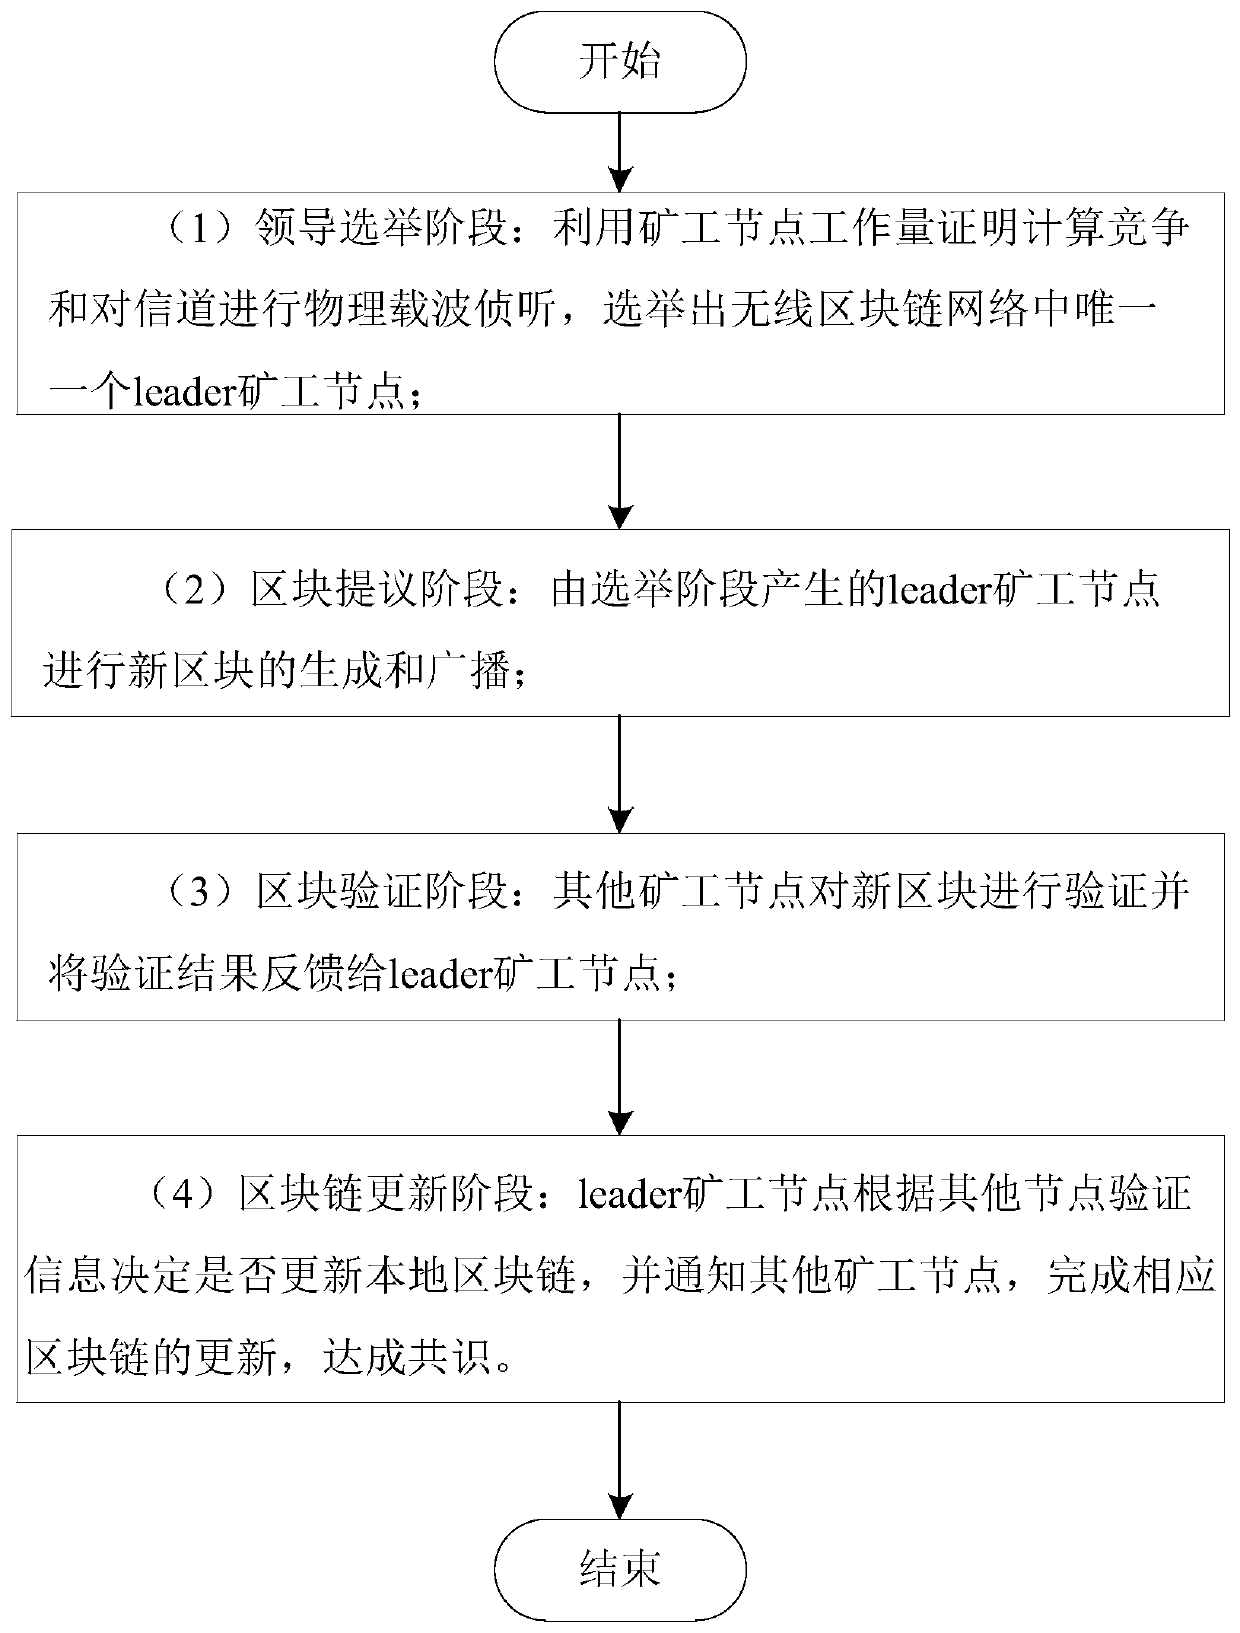 Consensus method suitable for wireless block chain network